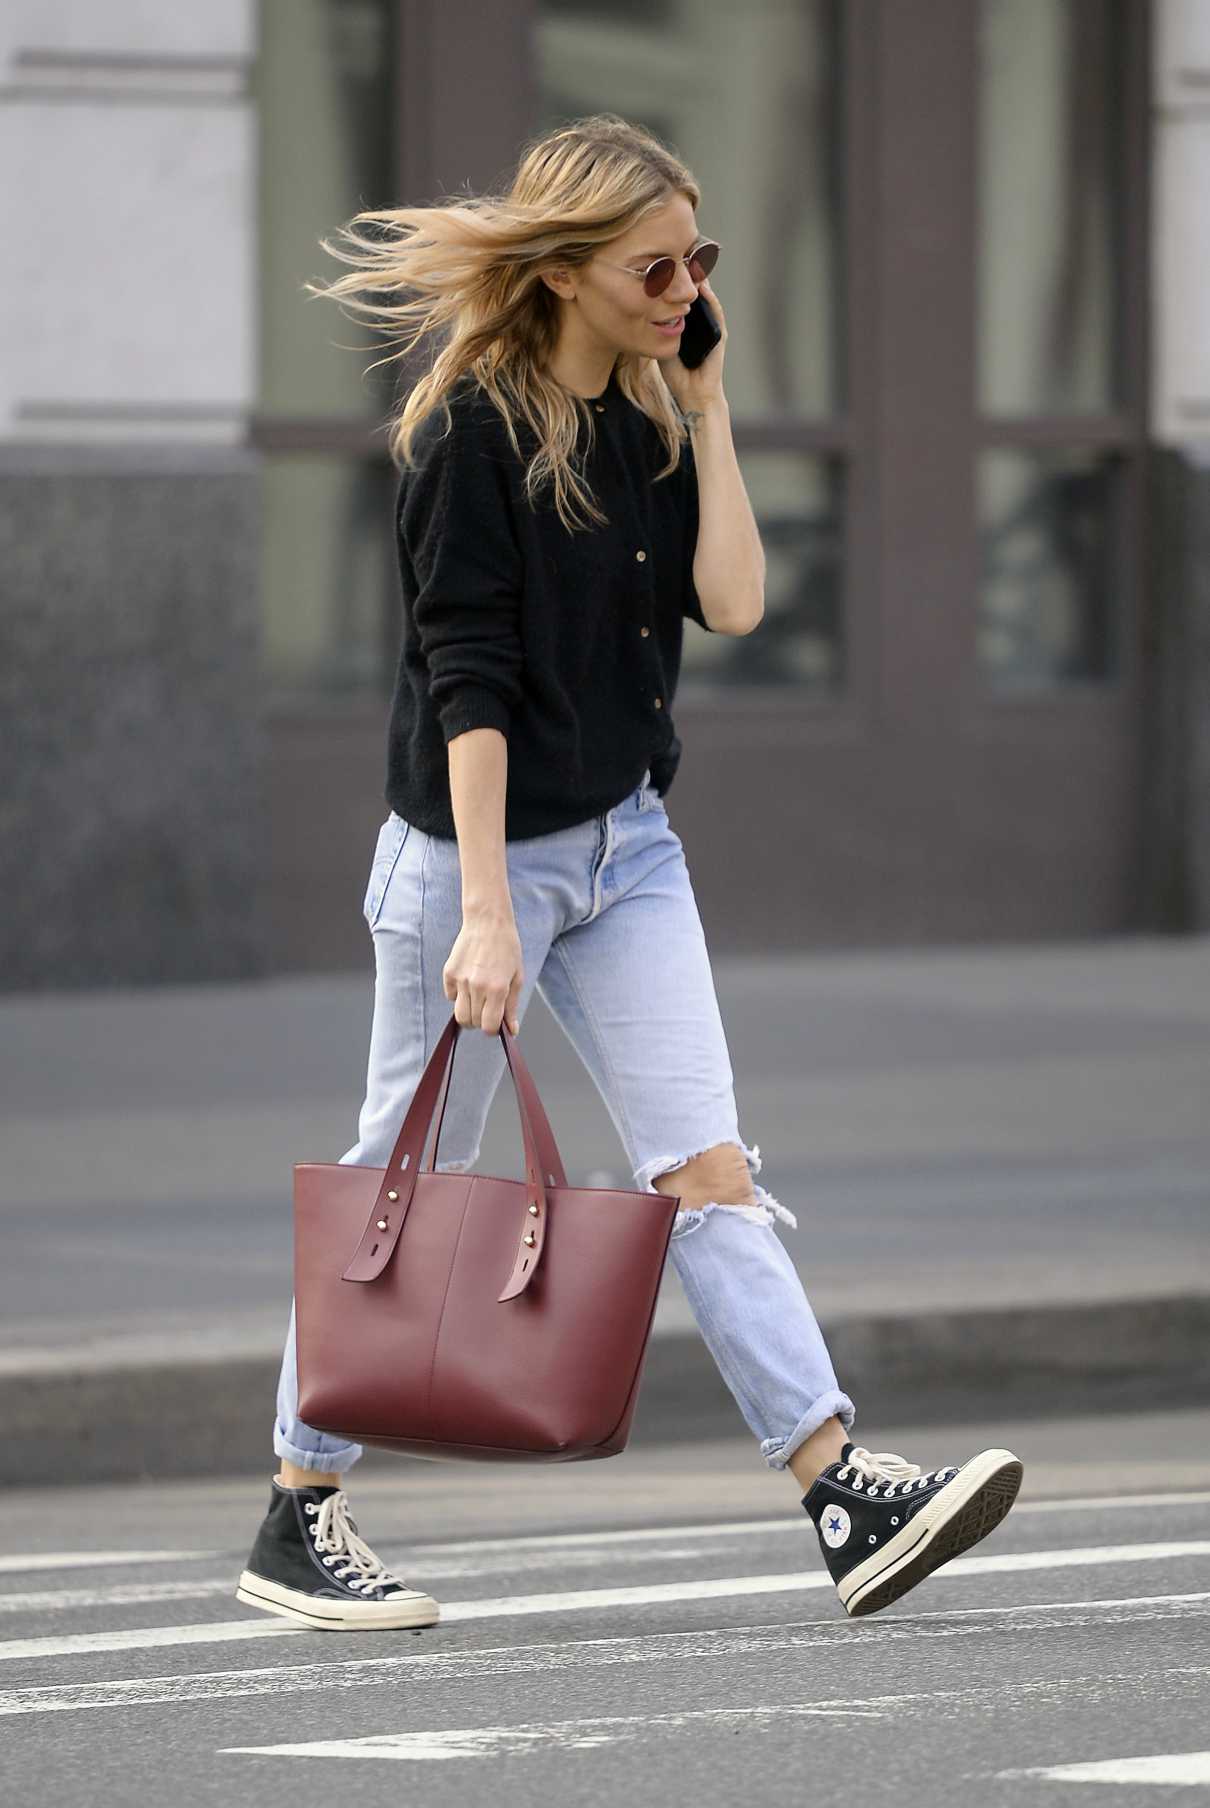 Sienna Miller In A Blue Ripped Jeans Was Seen Out In Nyc 04 09 2019 5 